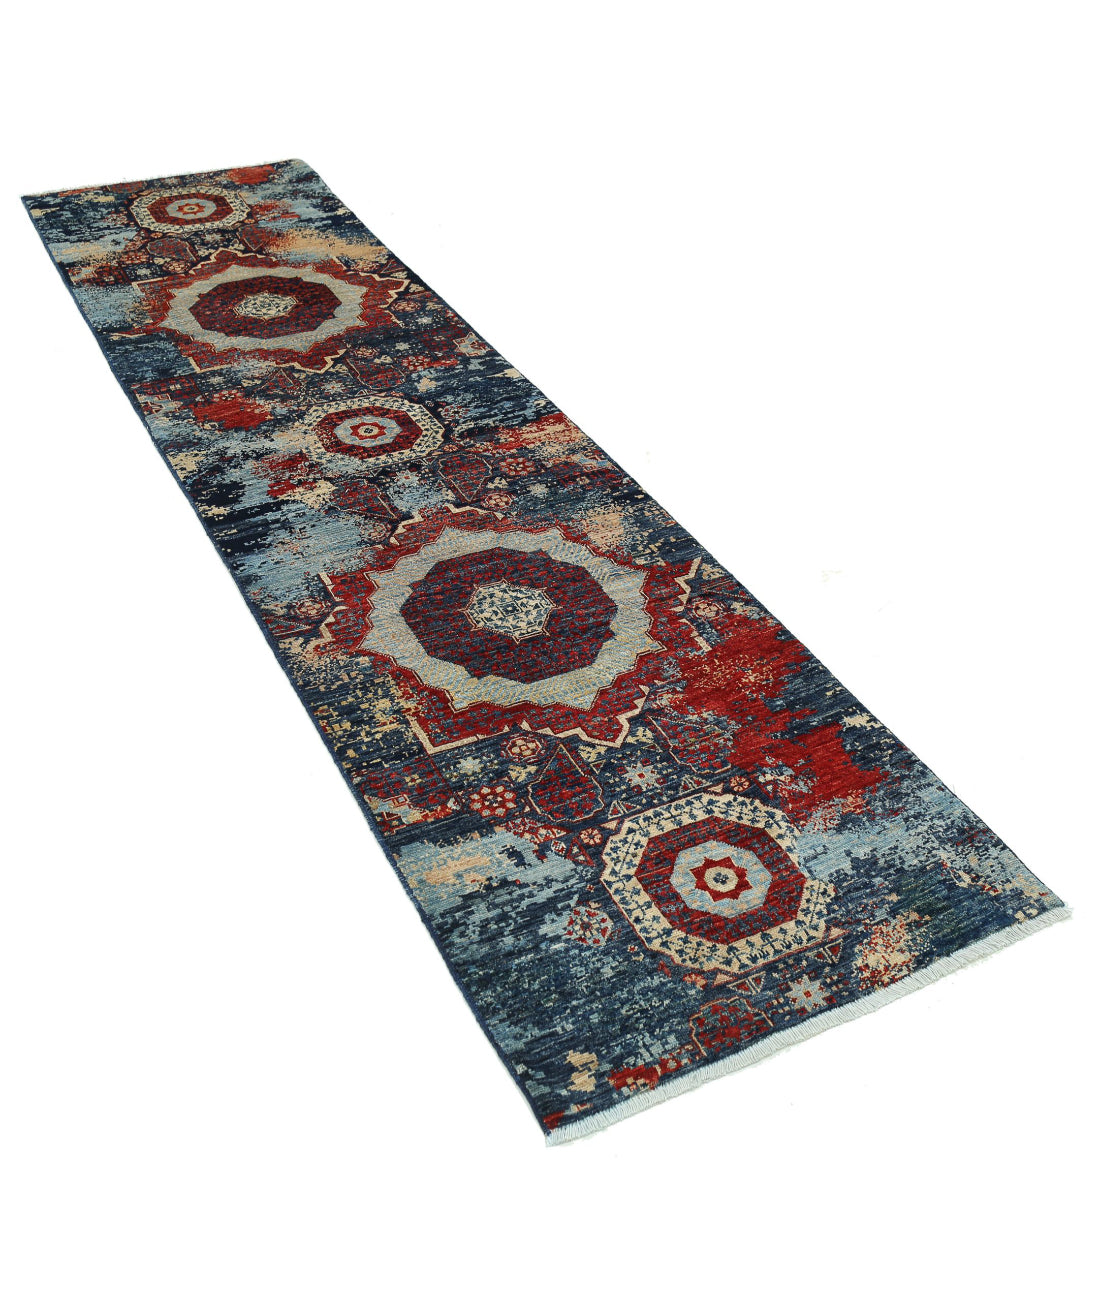 Mamluk 2'6'' X 9'7'' Hand-Knotted Wool Rug 2'6'' x 9'7'' (75 X 288) / Blue / Red